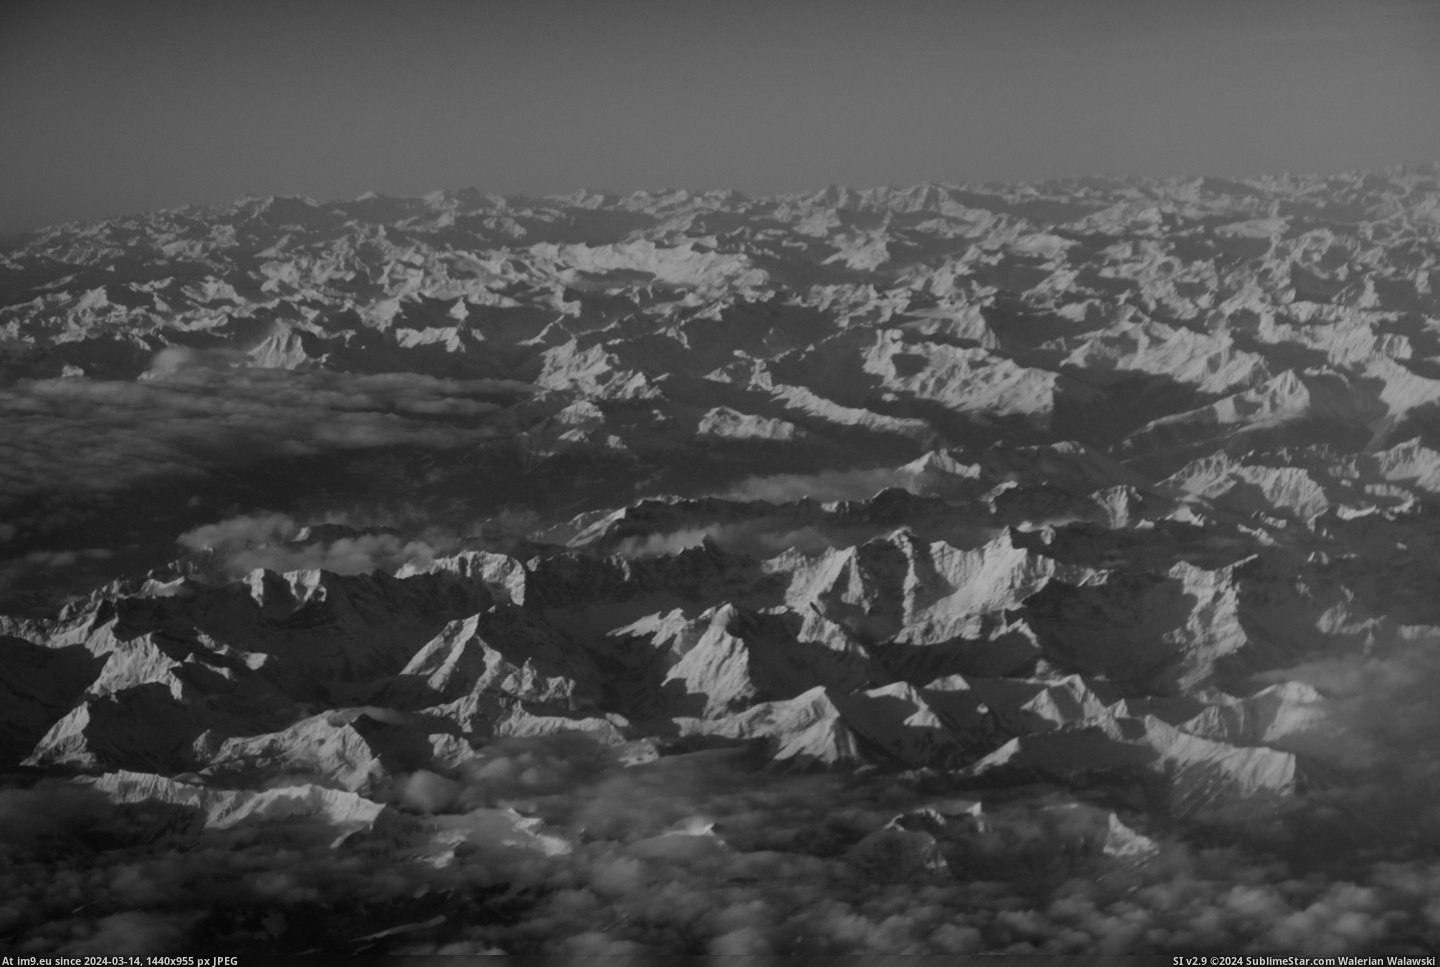 #Week #Airplane #Swiss #Alps [Earthporn] The Swiss Alps, taken from an airplane last week [4331x2887] Pic. (Изображение из альбом My r/EARTHPORN favs))